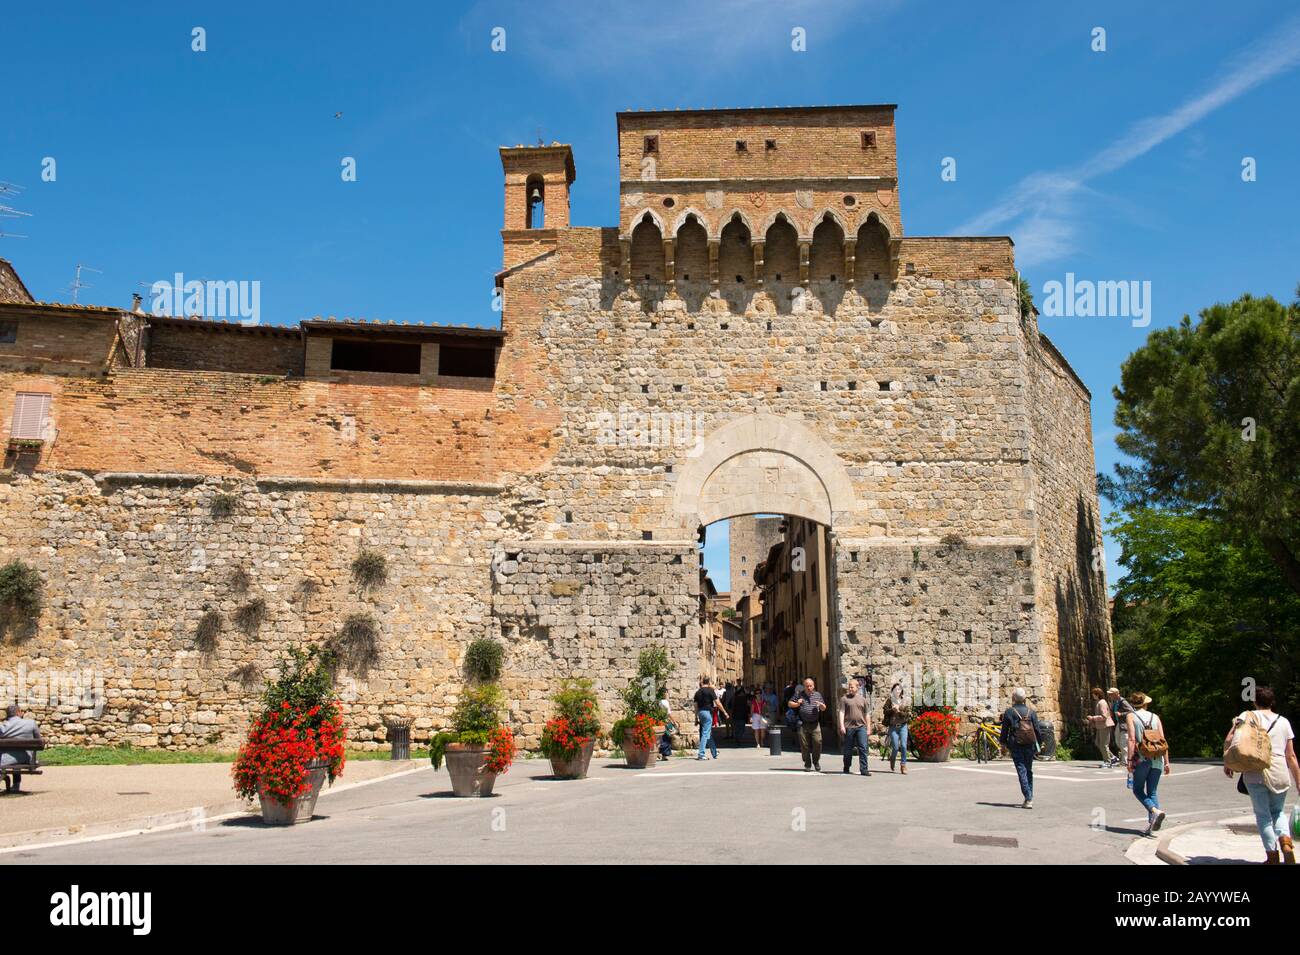 One of the gates of the medieval walled hill town of San Gimignano in Tuscany, Italy. Stock Photo